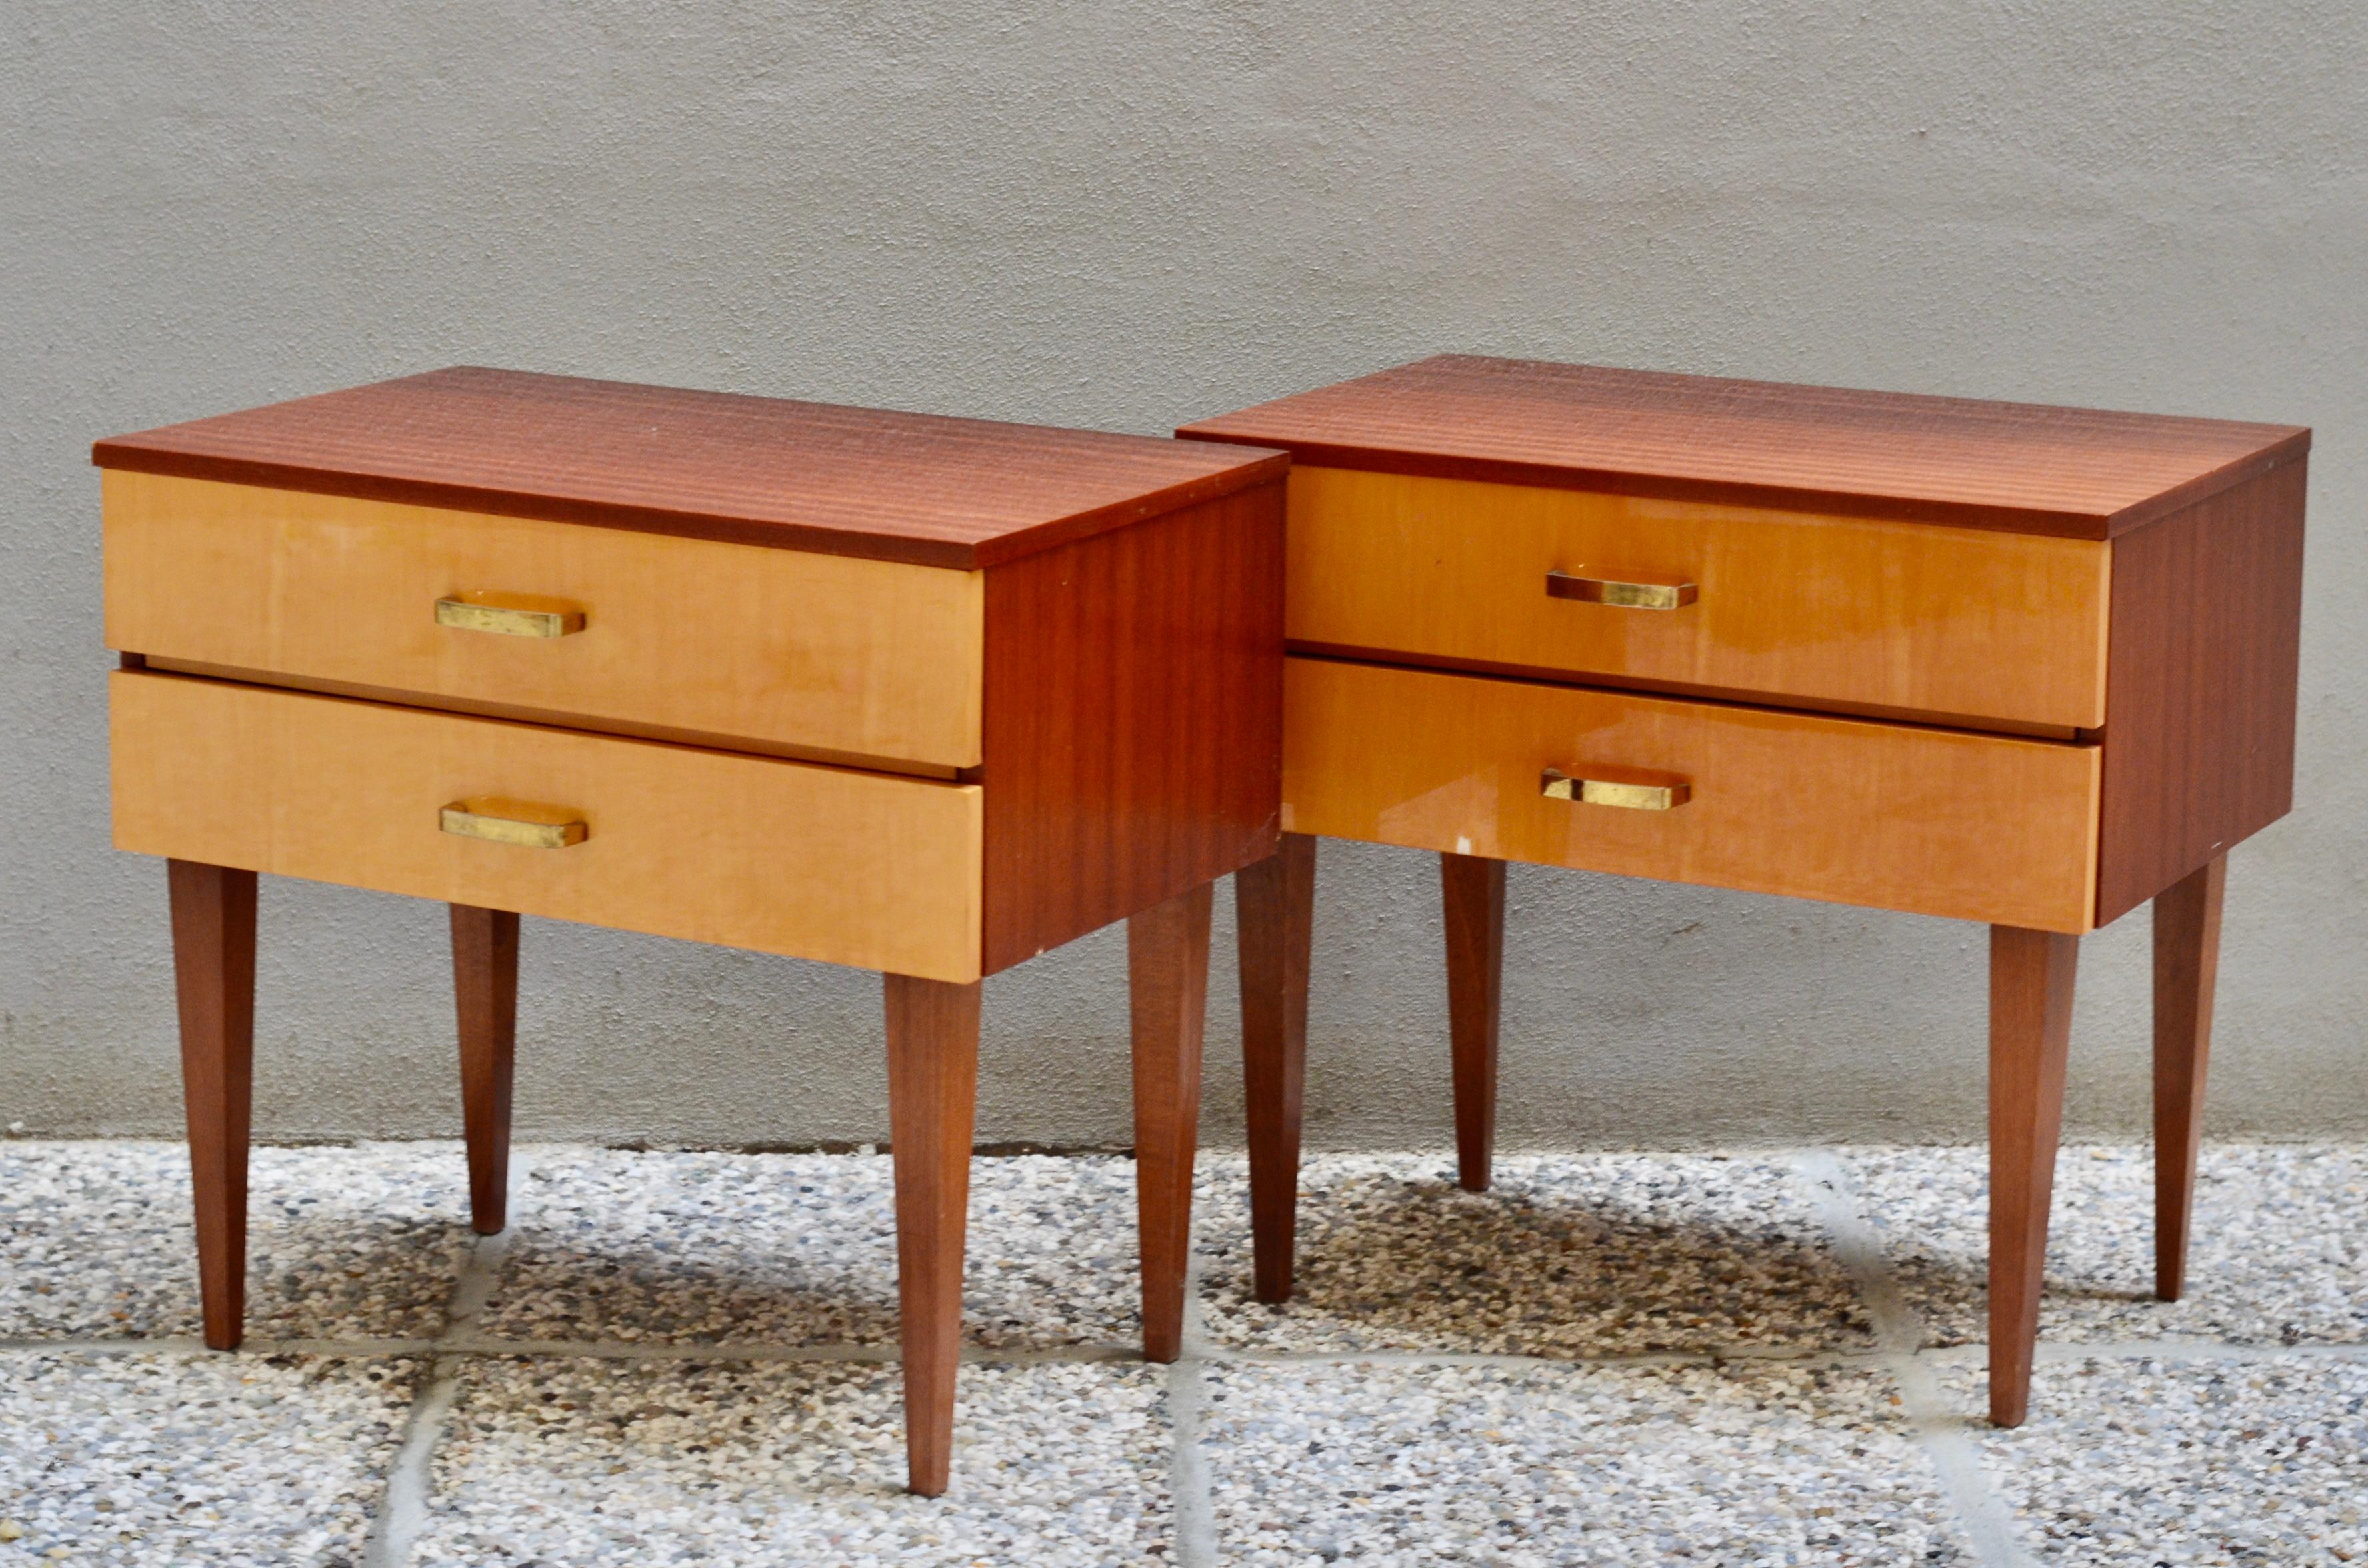 Pair of nightstands / bedside tables, 1970s.
Material: wood, plywood, furnished.
Period: 1970s
Style: mid-century, classic Italian.
Production: Meblo (label), Slovenia/Yugoslavia.